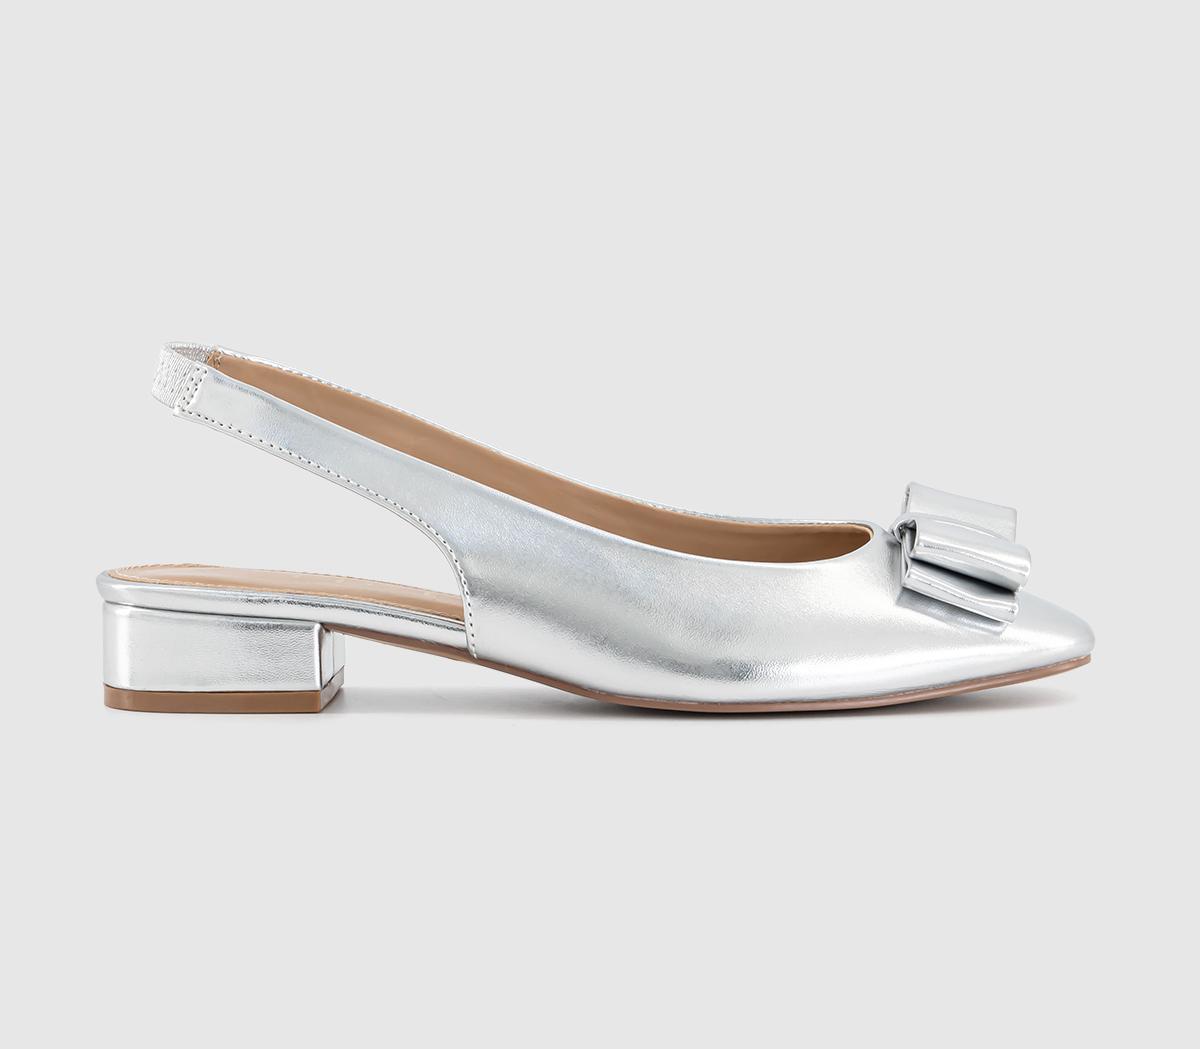 OFFICEFiesta Bow Slingback Ballet PumpsSilver Patent